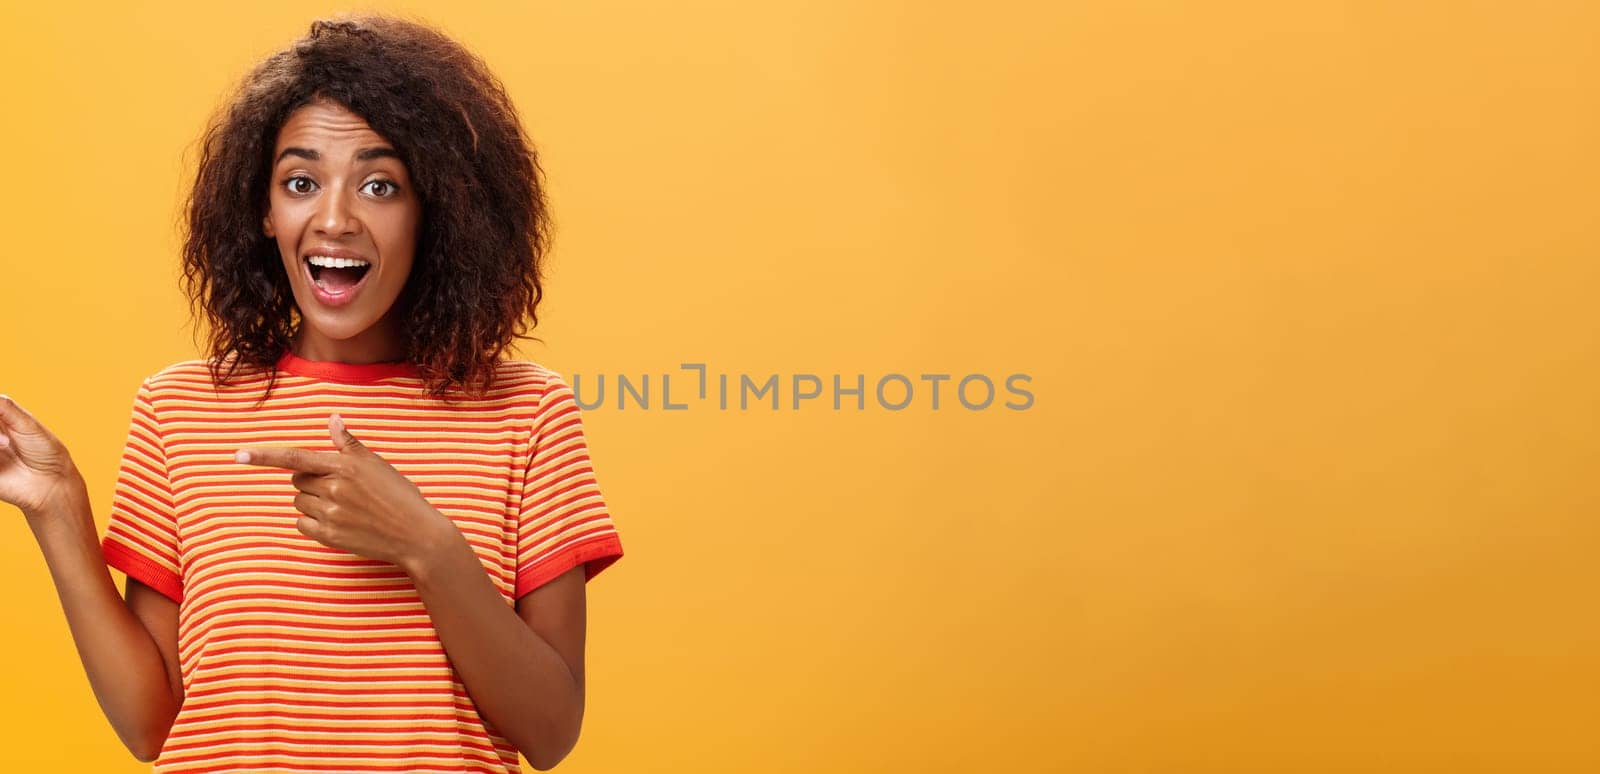 Portrait of amazed excited charismatic dark-skinned young pretty girl with afro hairstyle in trendy striped t-shirt pointing left delighted and fascinated posing against orange background. Lifestyle.